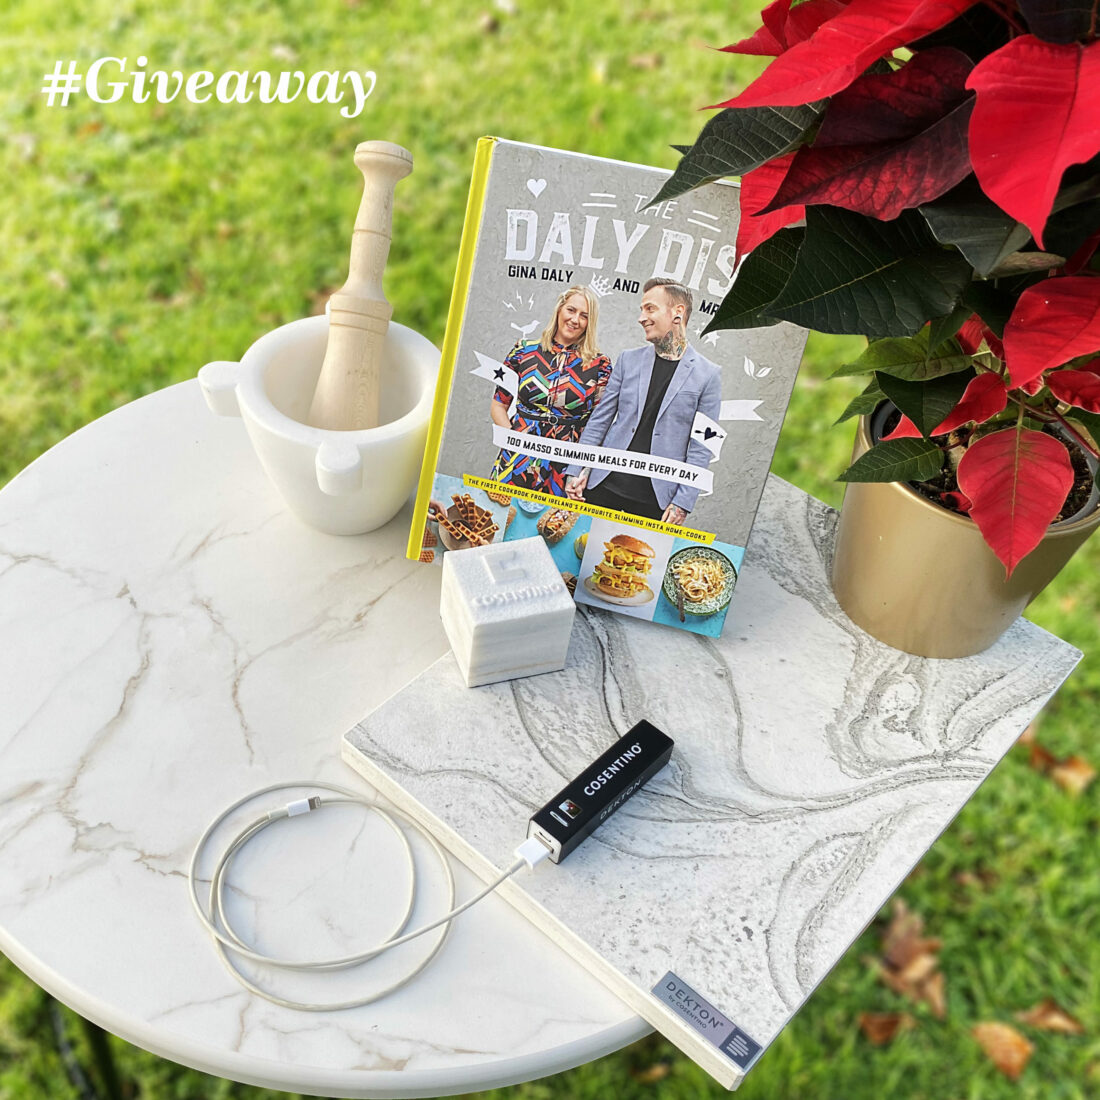 Cosentino Instagram Giveaway with The Daly Dish – Terms and Conditions